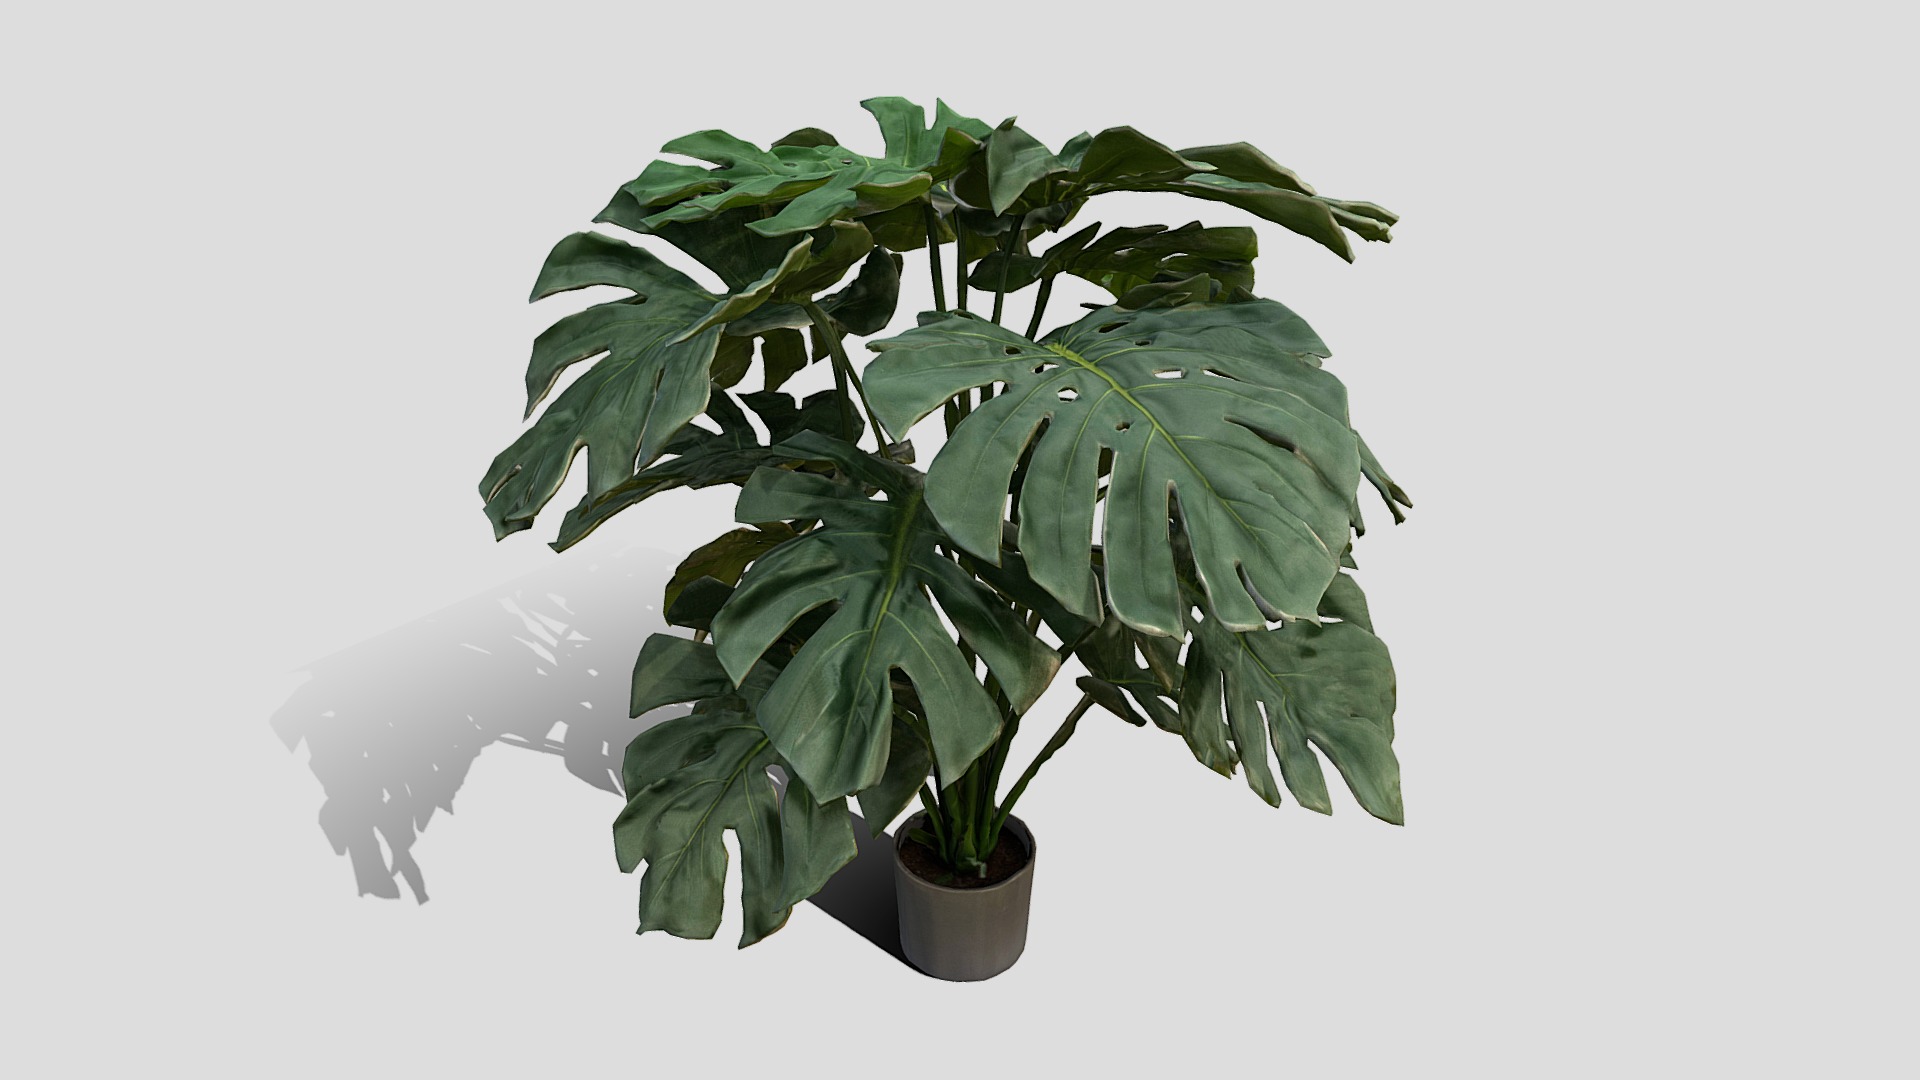 3D model 000055_151110 - This is a 3D model of the 000055_151110. The 3D model is about a potted plant with a shadow.